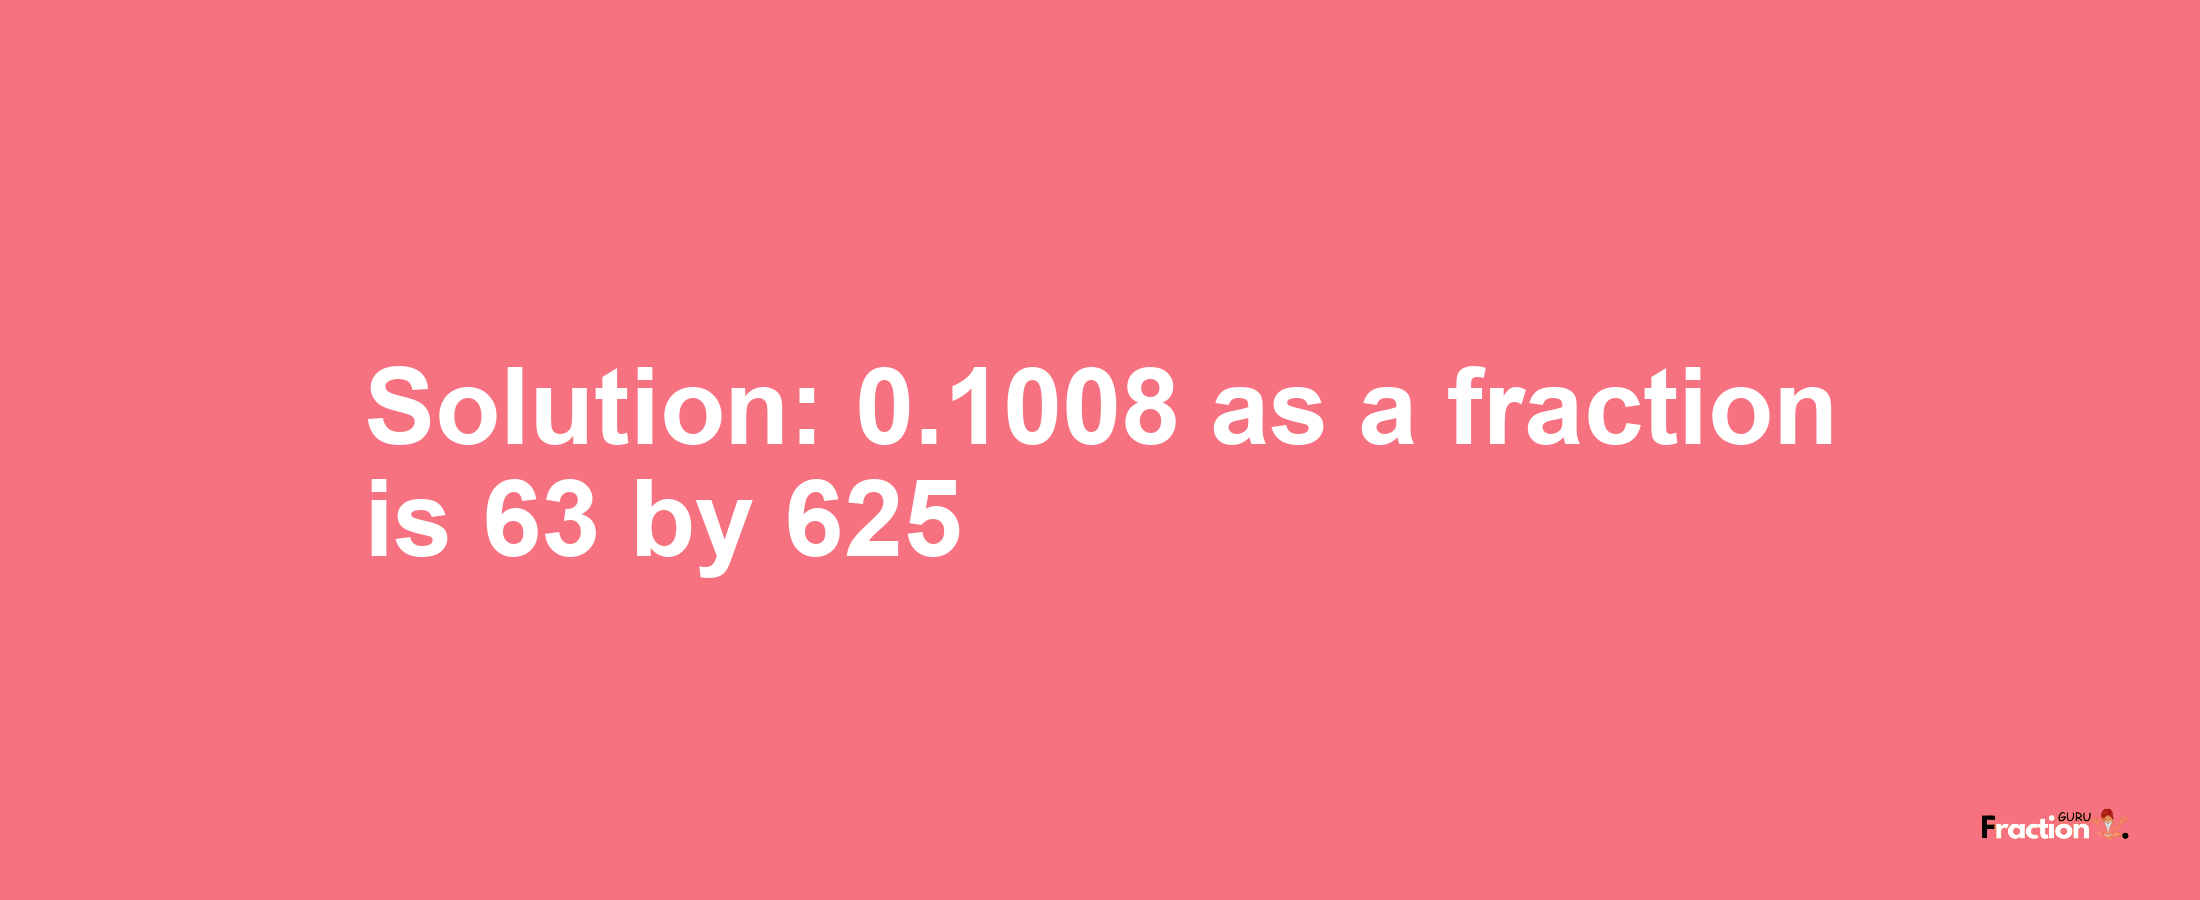 Solution:0.1008 as a fraction is 63/625